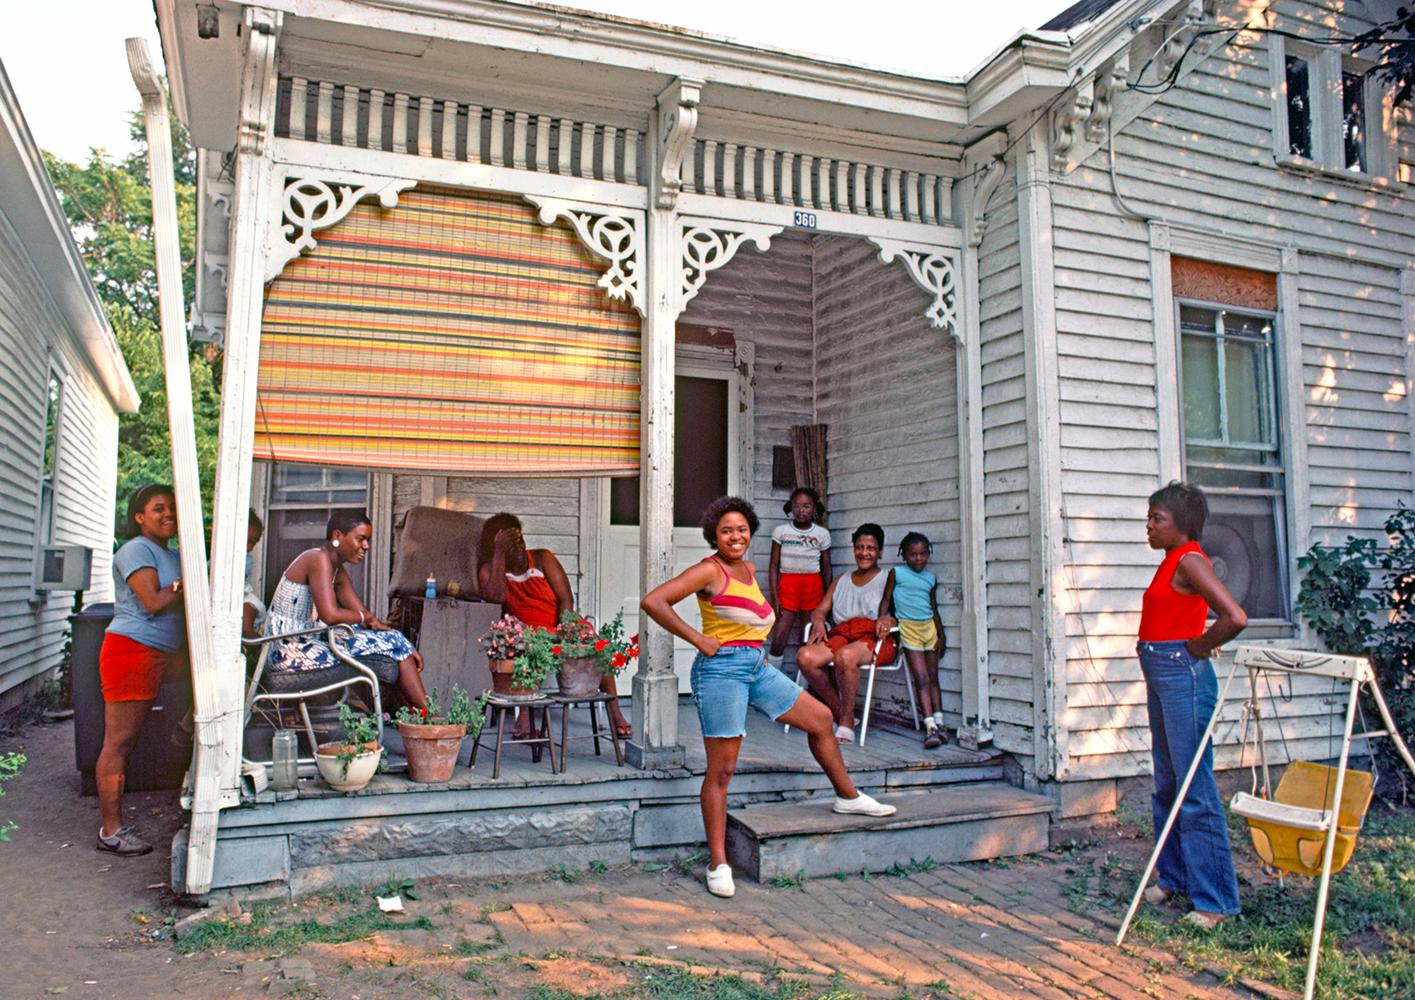 Happy Neighbours by Alain Le Garsmeur
An African American family relaxing outside their house in downtown Lexington, Kentucky, USA - August 1984.

Paper size 30 x 40 inches / 76 x 101 cm  
Printed in 2023 
Archival Pigment Print 
Signed and numbered